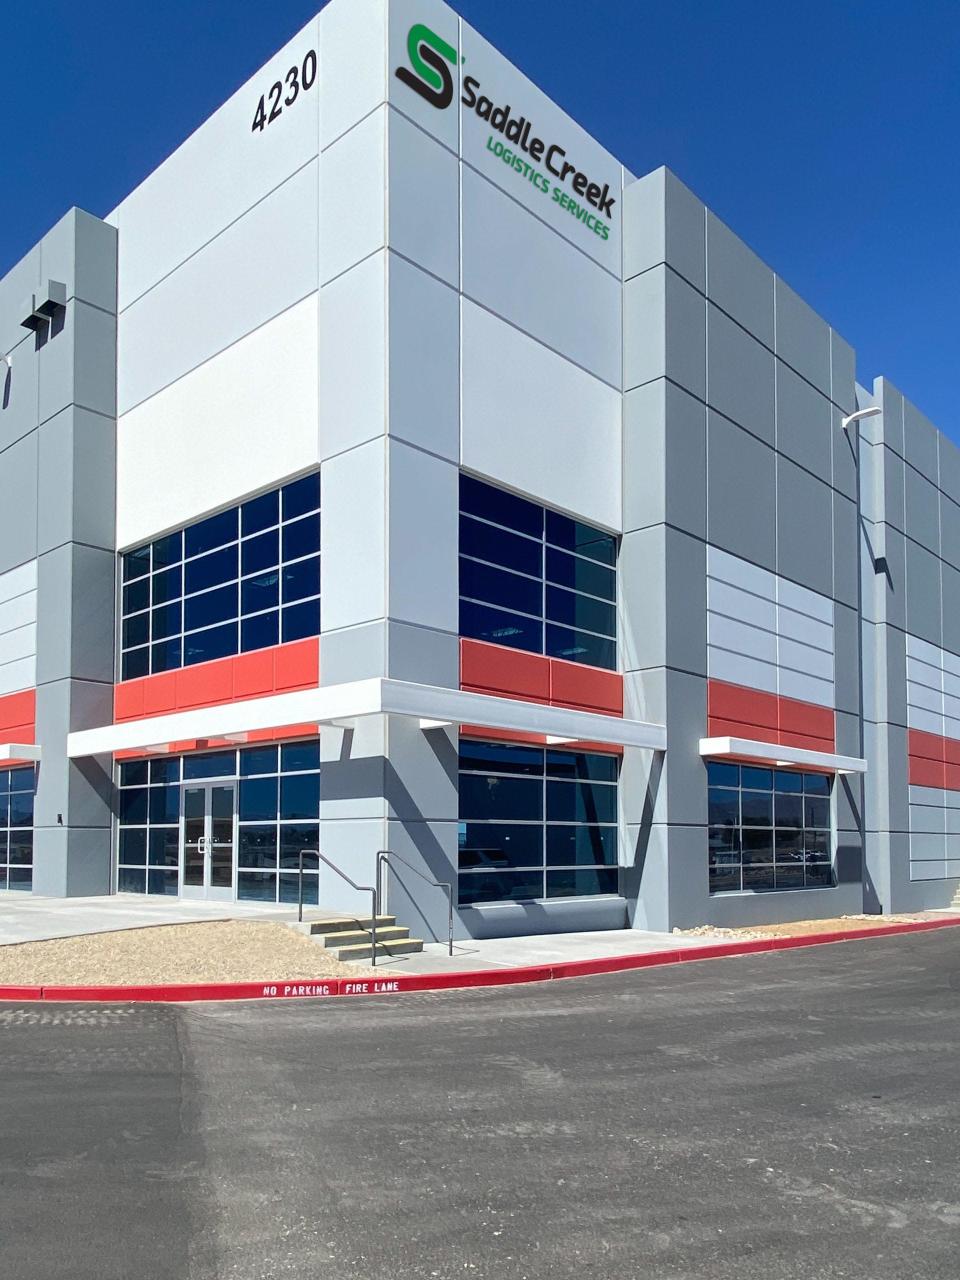 Saddle Creek is set to open a Las Vegas distribution center in August as part of continued West Coast expansion.